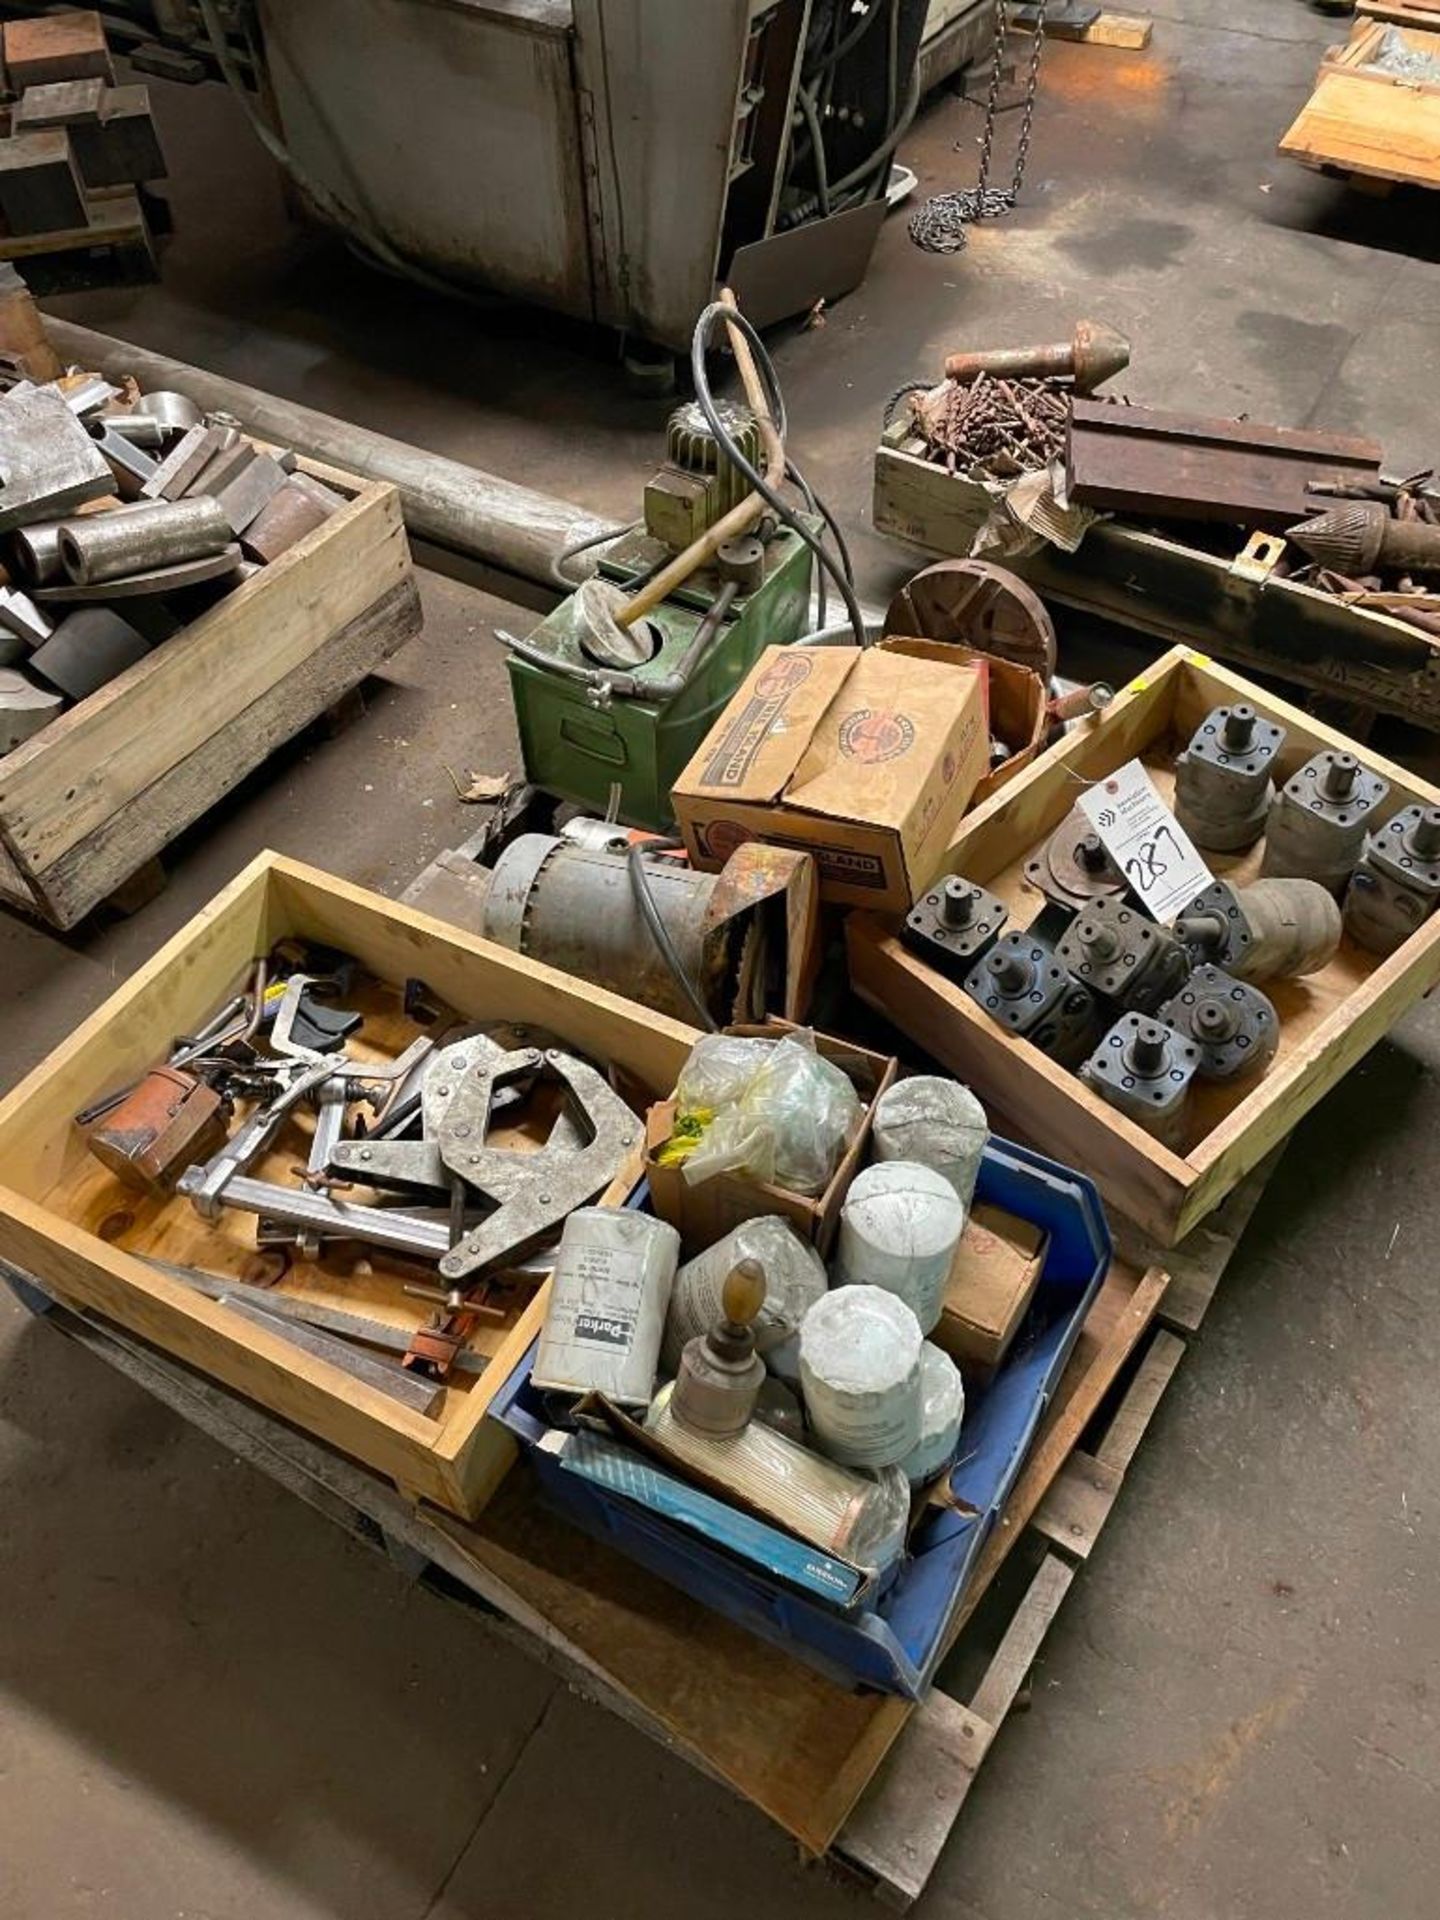 LOT OF CLAMPS, PUMPS, FILTERS